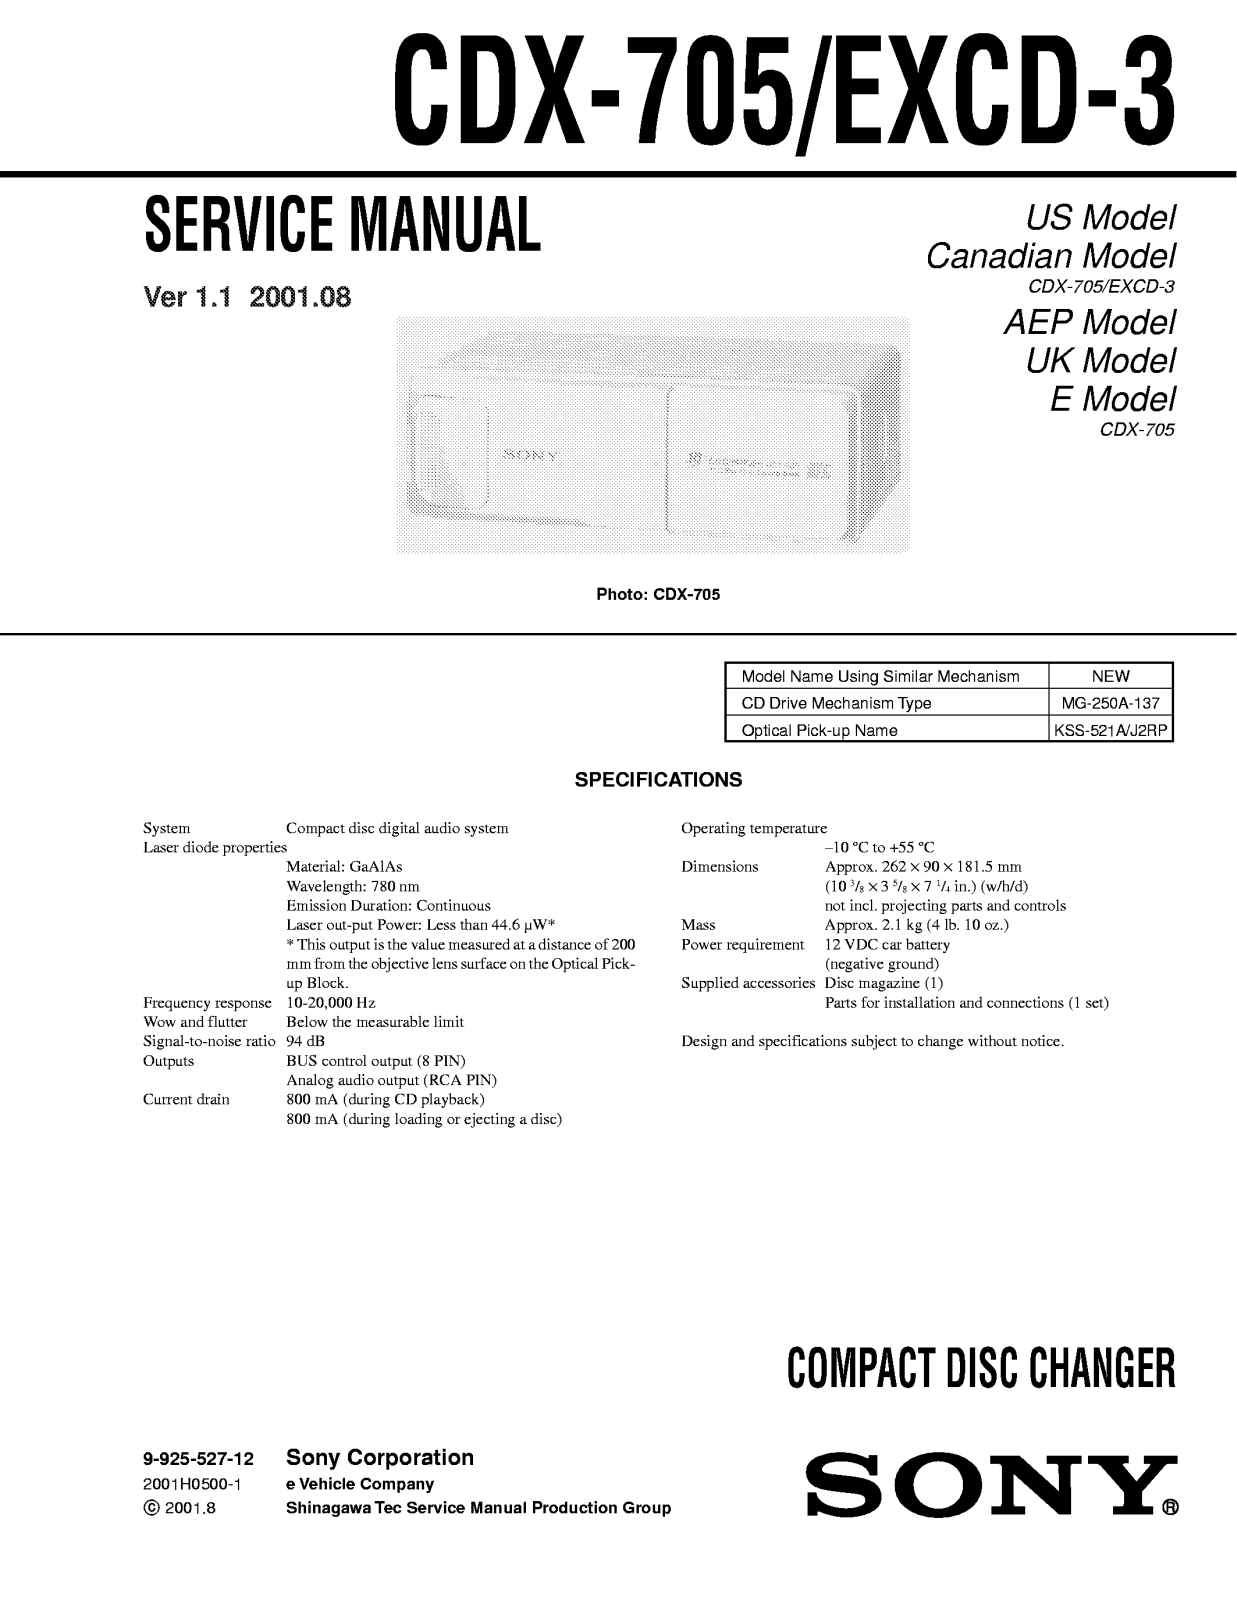 Sony CDX-EXCD-3 Service Manual